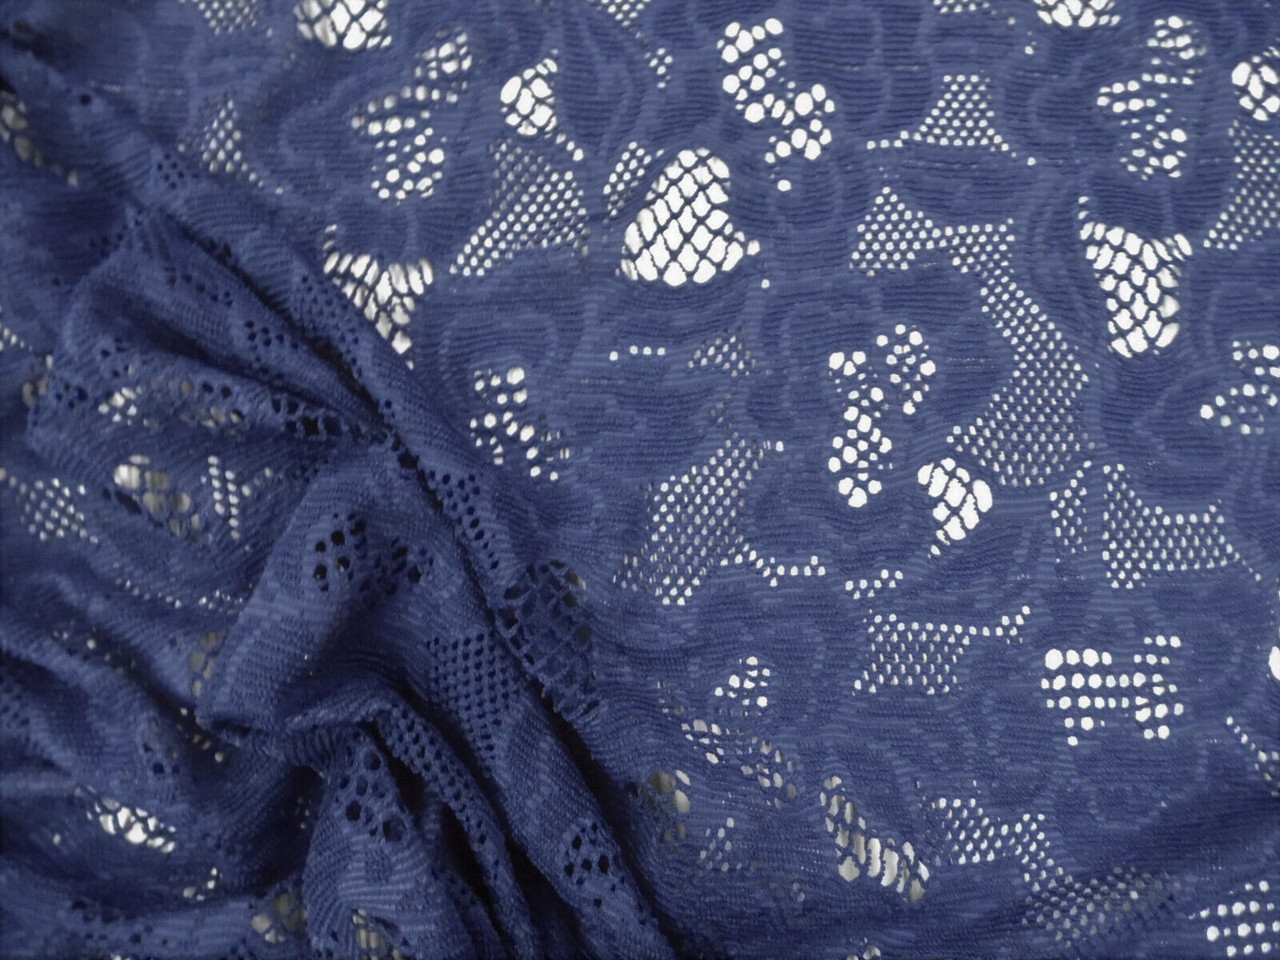 Embroidered Stretch Lace Apparel Fabric Sheer Dark Navy Floral EE106 